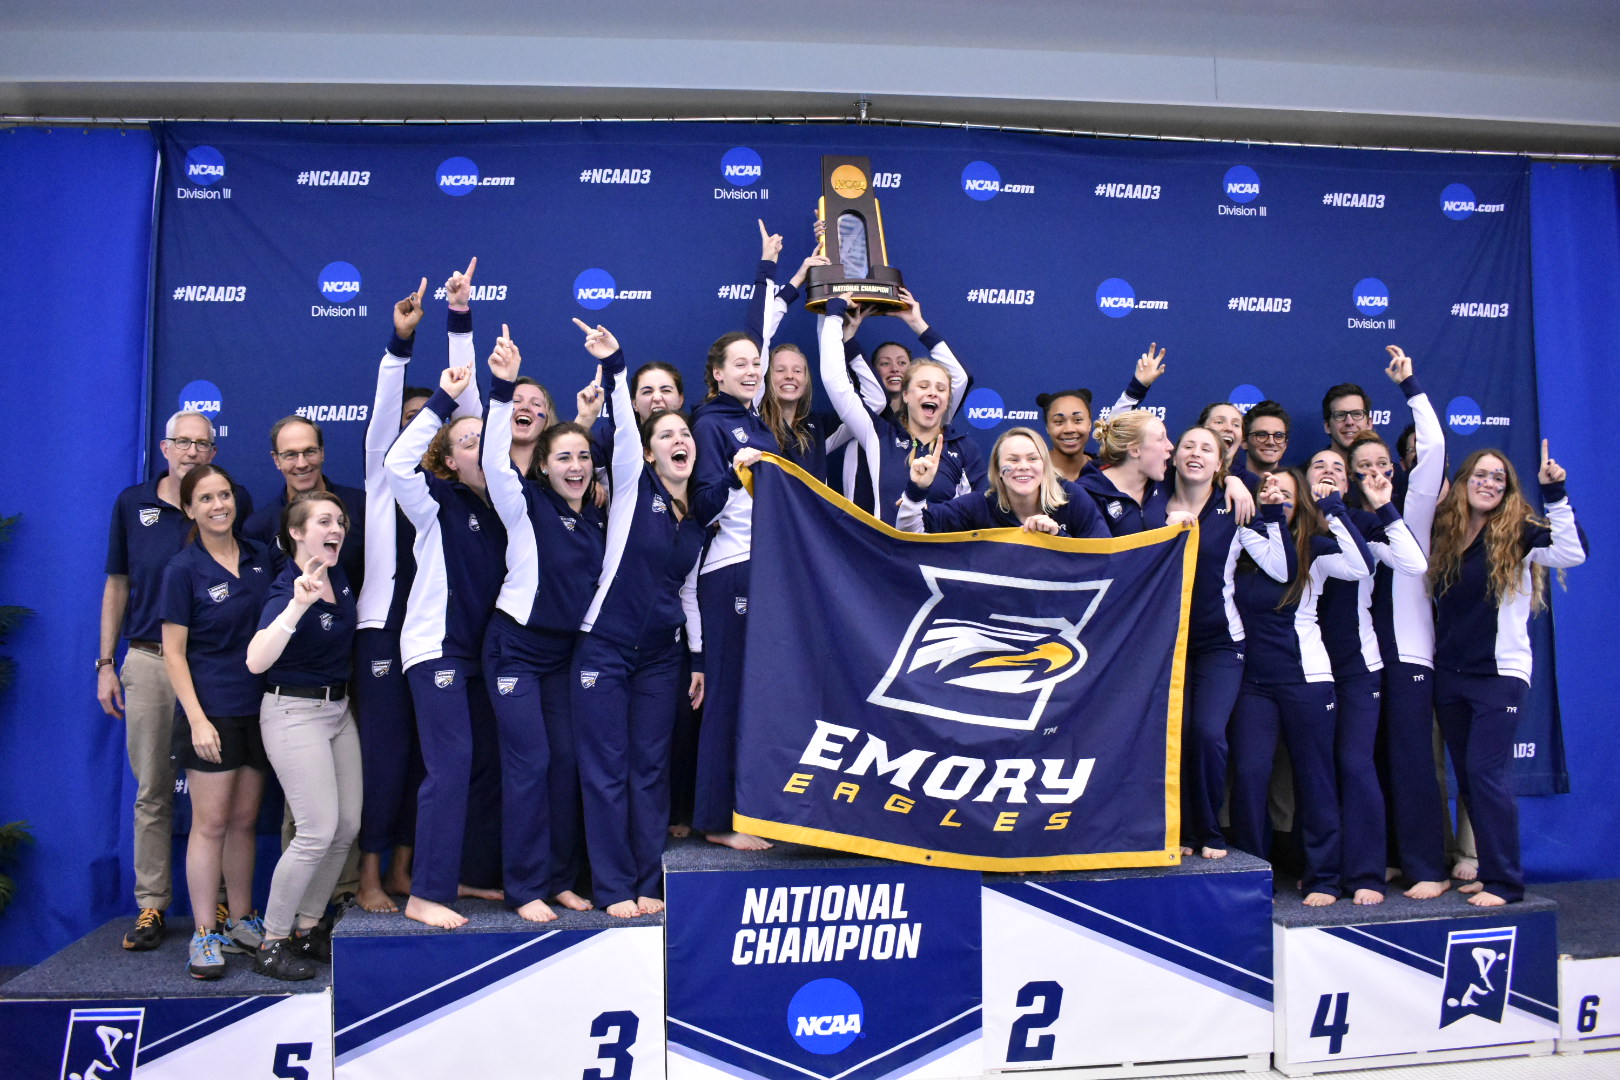 Emory Athletics capitalizes on the Supreme Court’s NCAA ruling